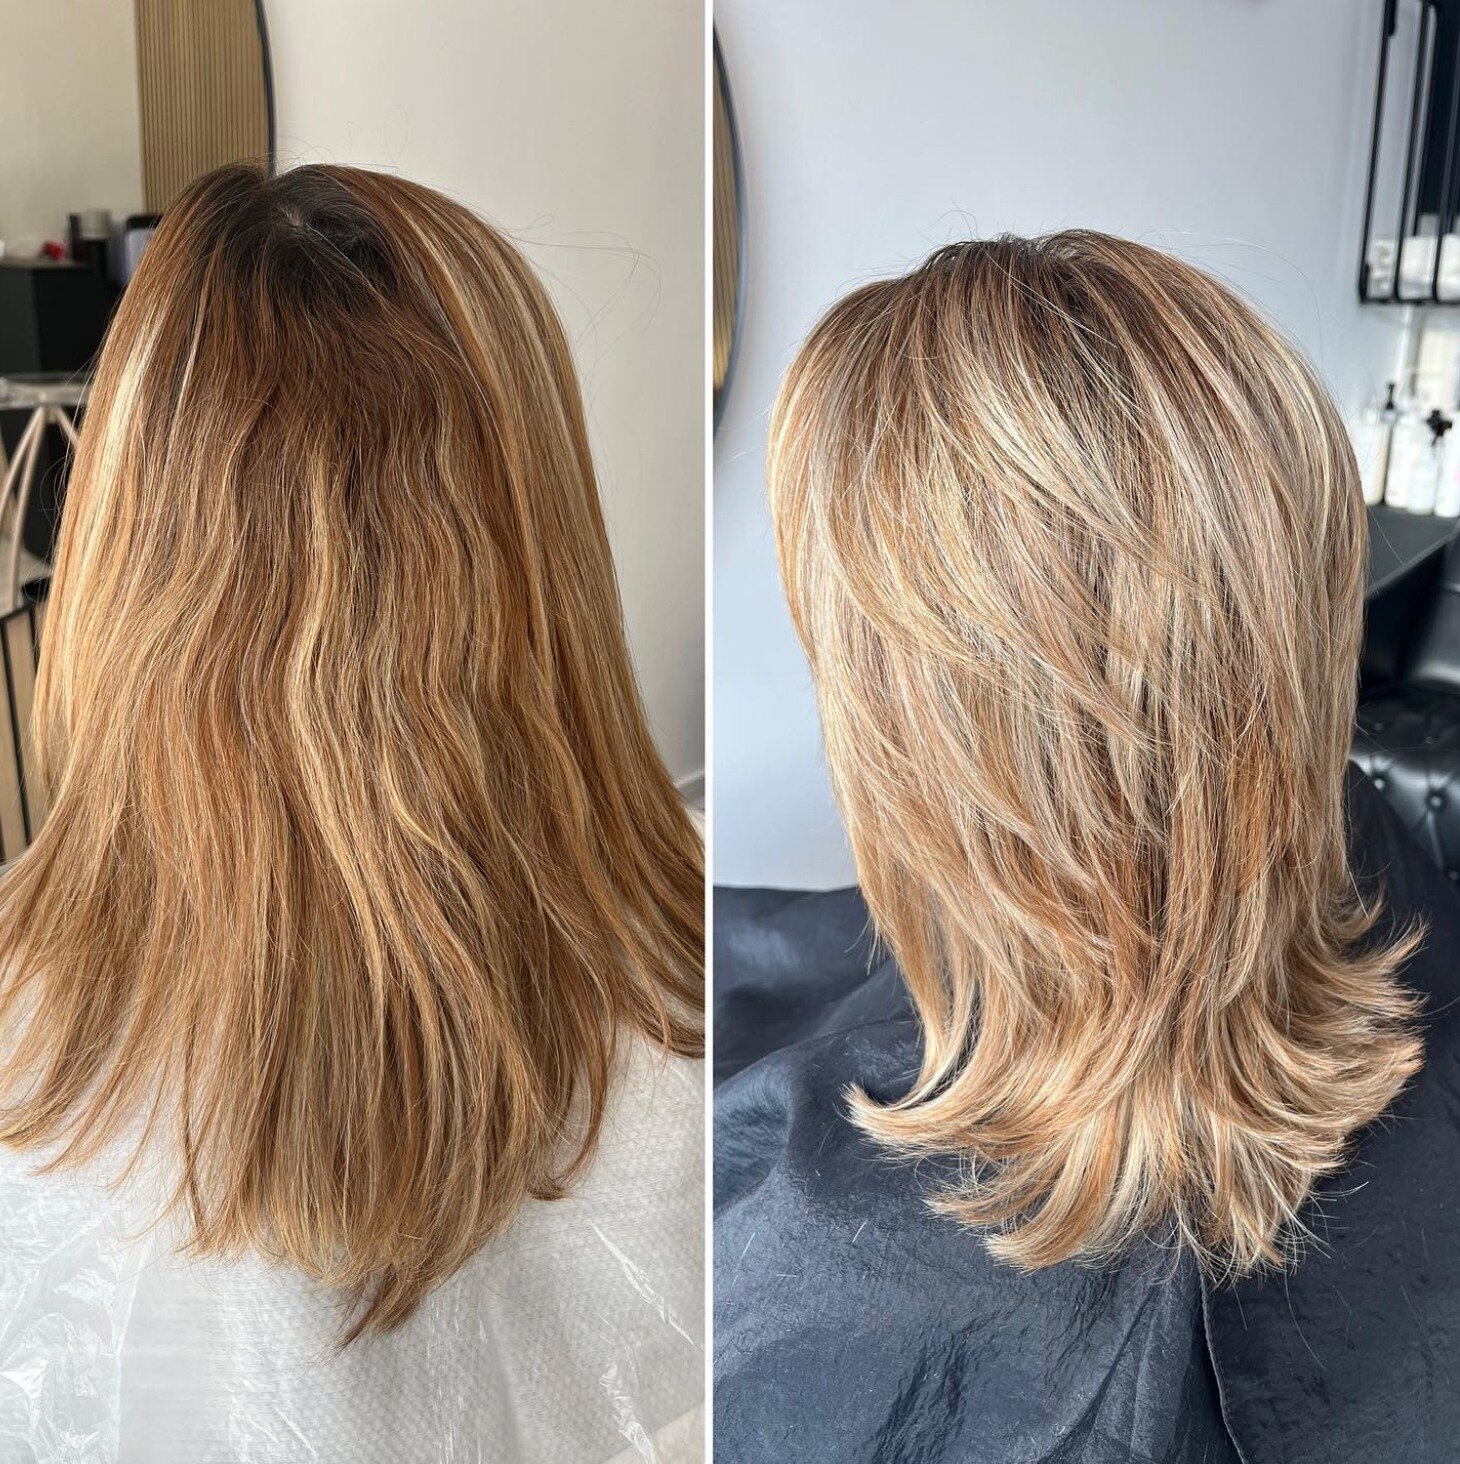 Look at this gorgeous hair transformation by Justyna.
If you didn't know, Justyna joined us in April. She is very professional and highly talented.

@hair_embassyofglam 

#hairlondon #londonsalon #hairtransformation